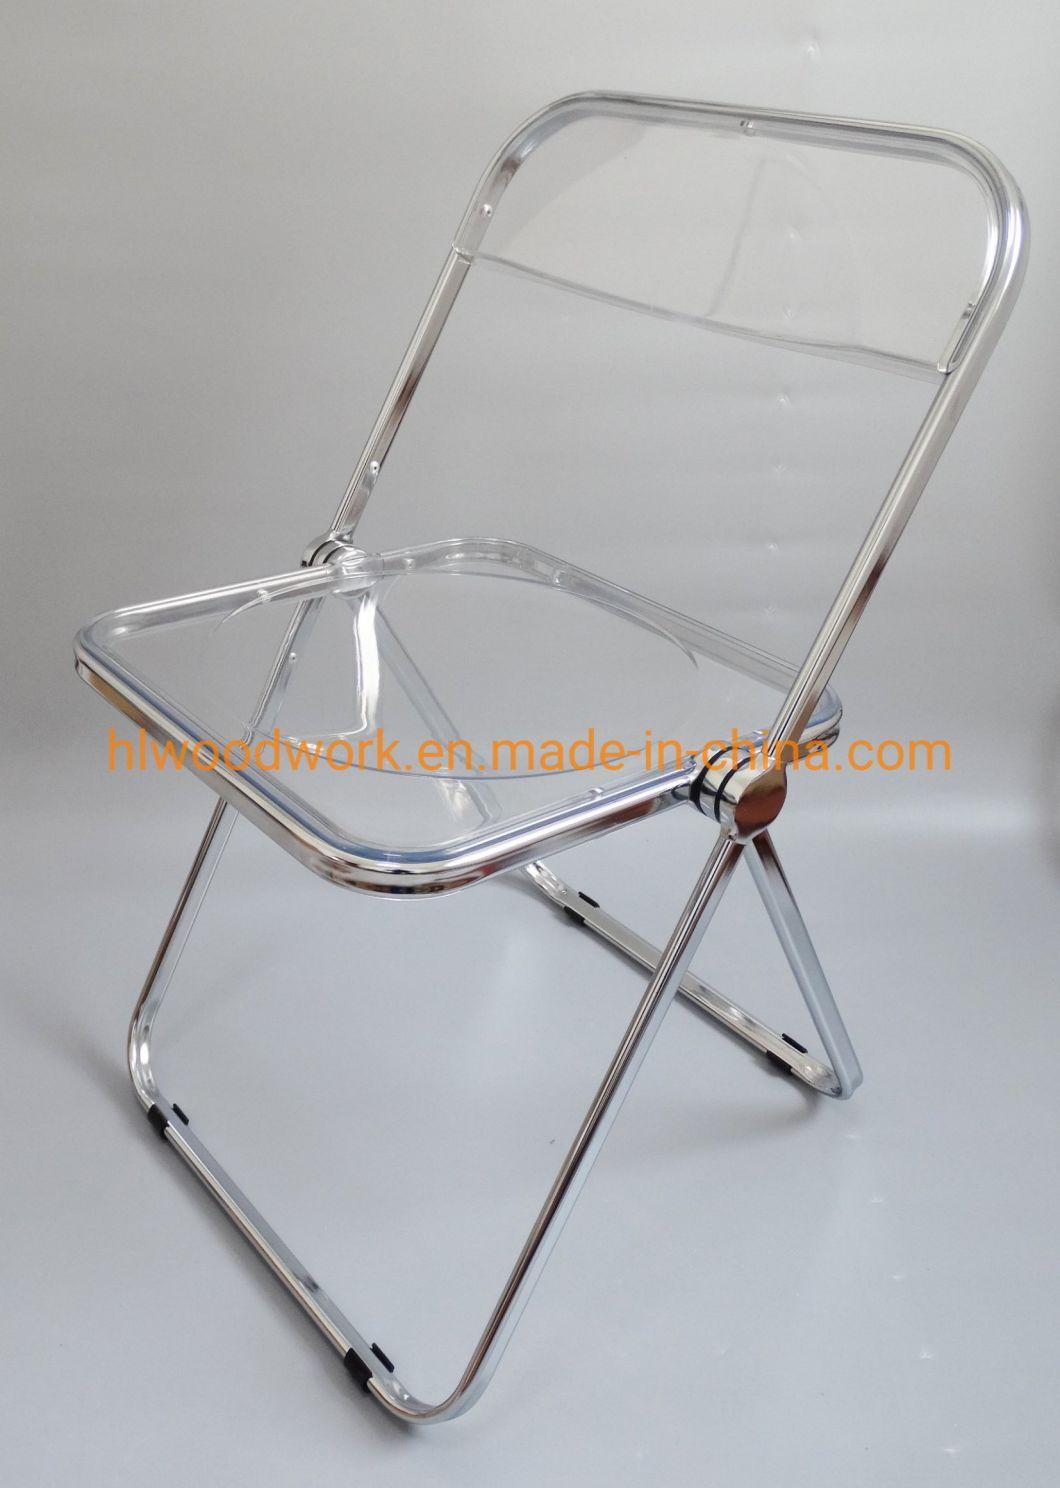 Modern Transparent Orange Folding Chair PC Plastic Dining Room Chair Chrome Frame Office Bar Dining Leisure Banquet Wedding Meeting Chair Plastic Dining Chair